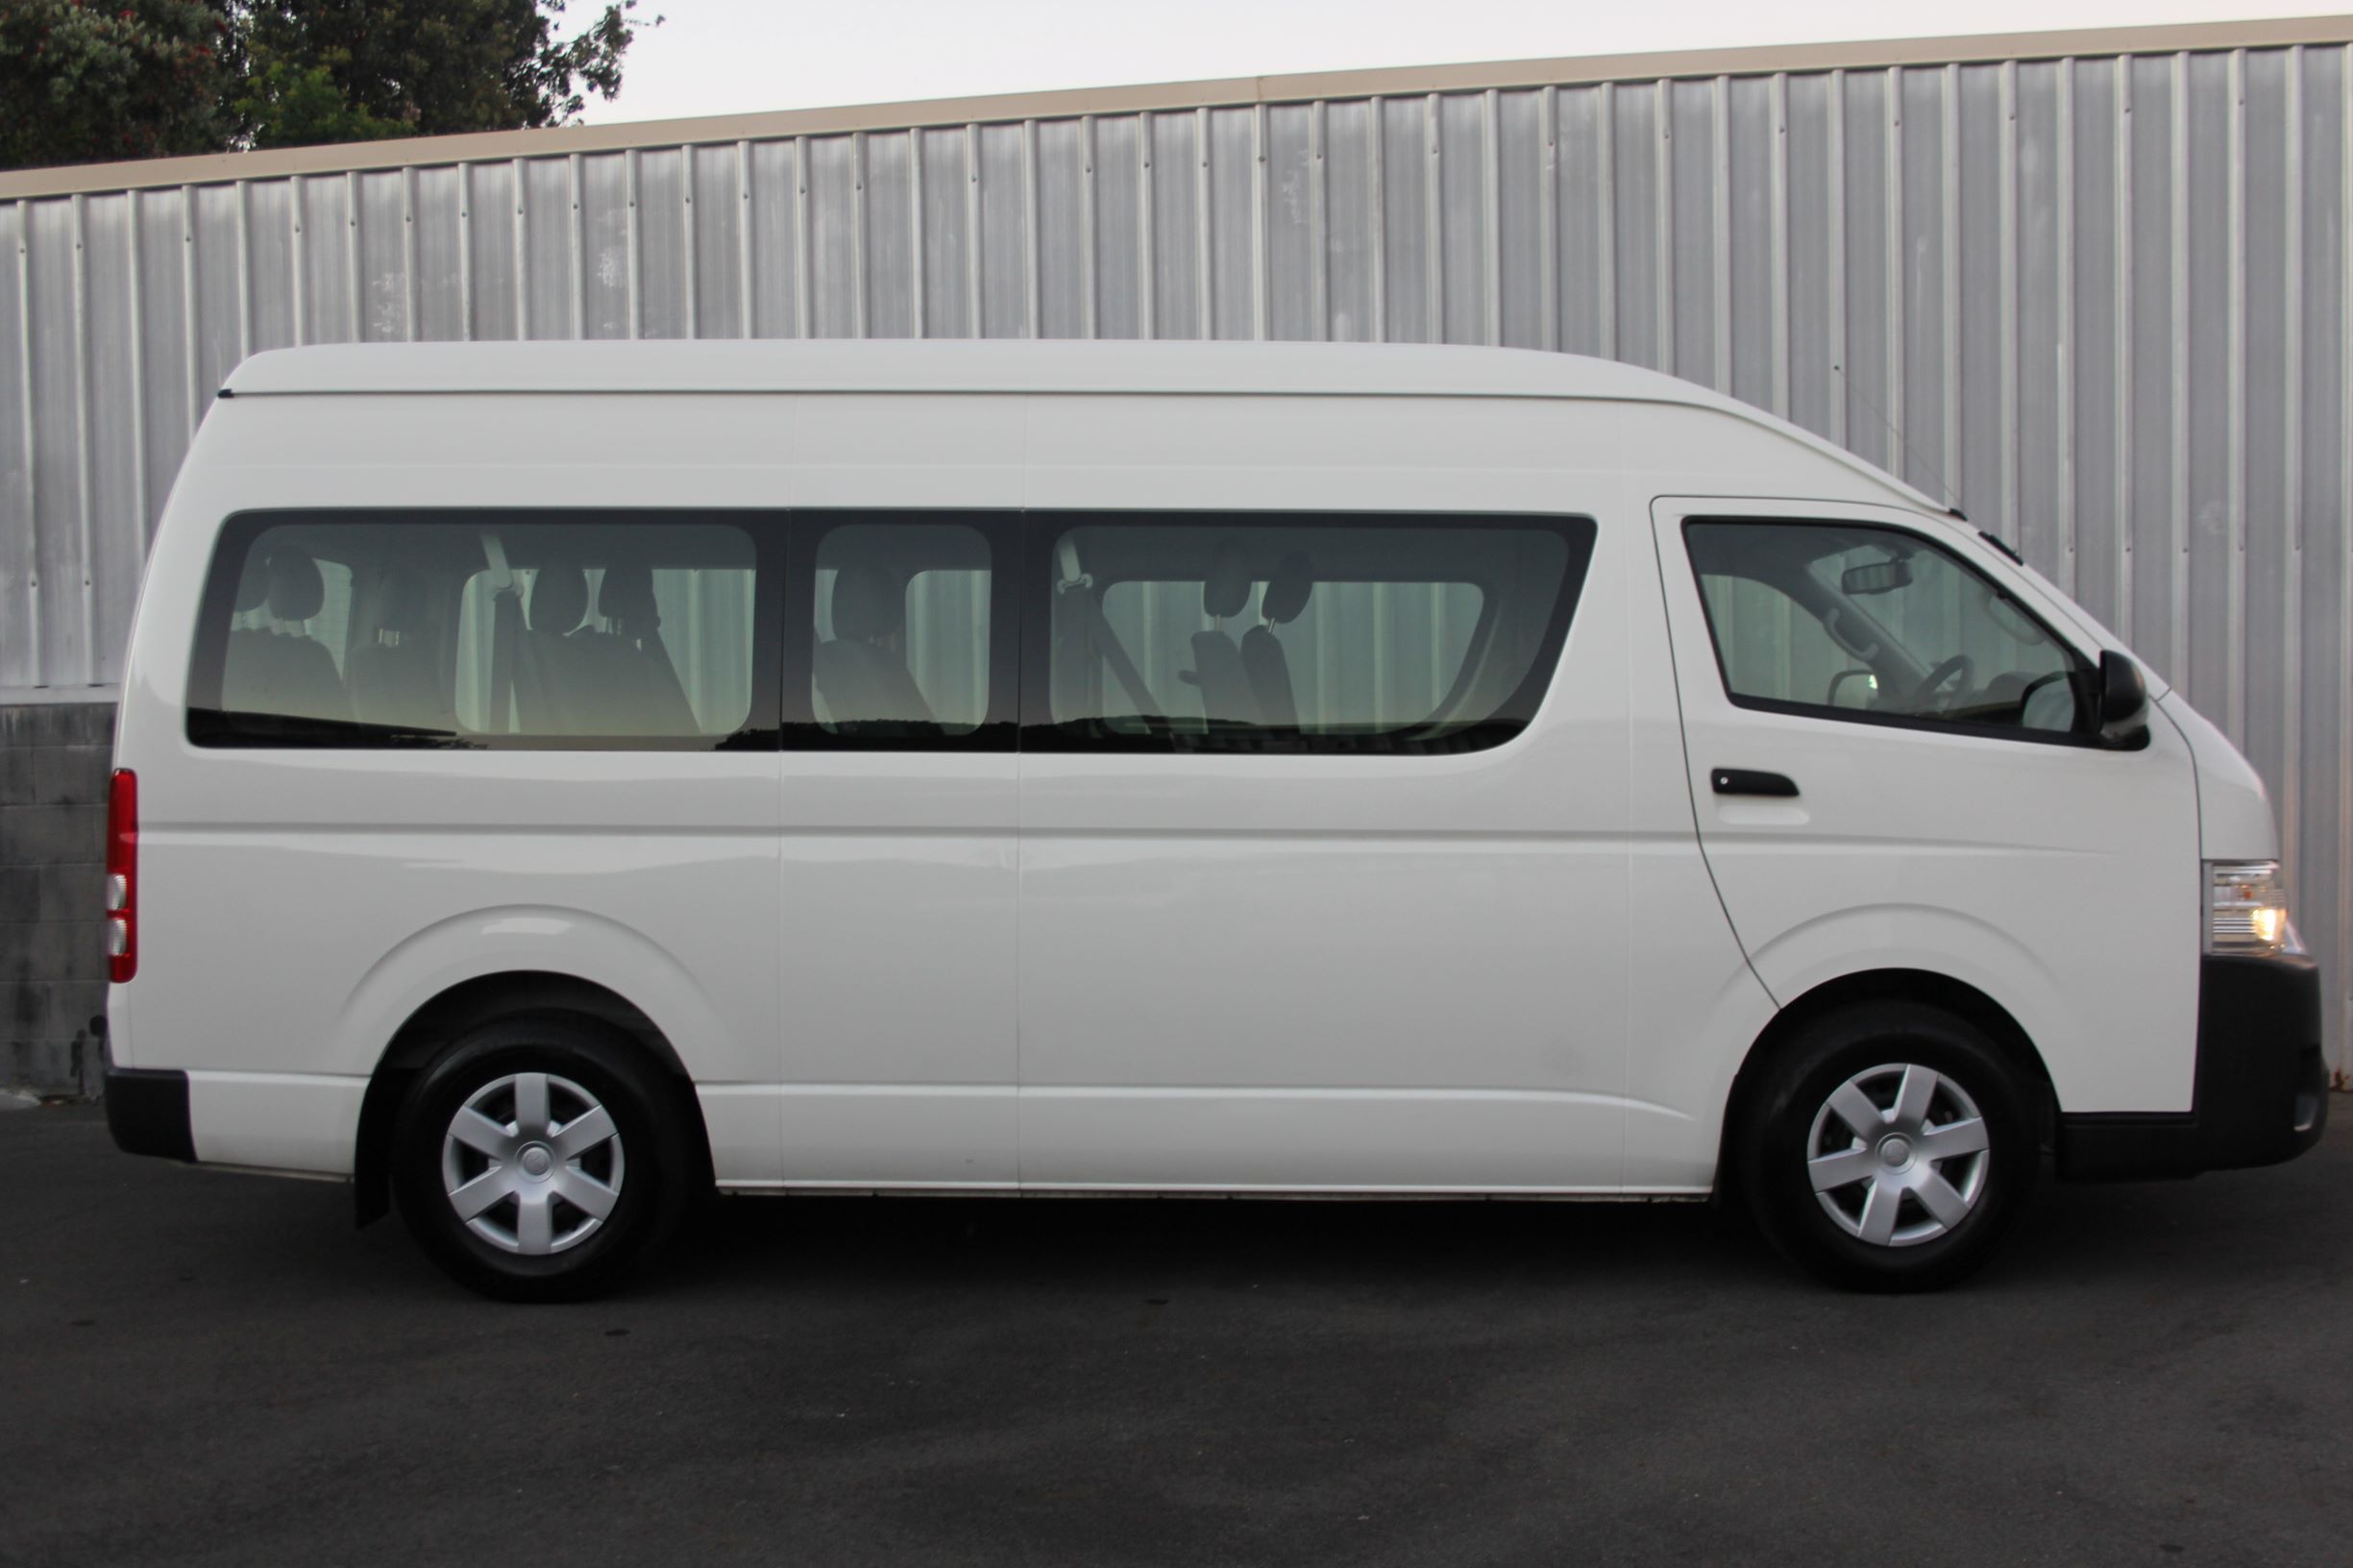 Toyota Hiace MINIBUS COACH 2019 for sale in Auckland